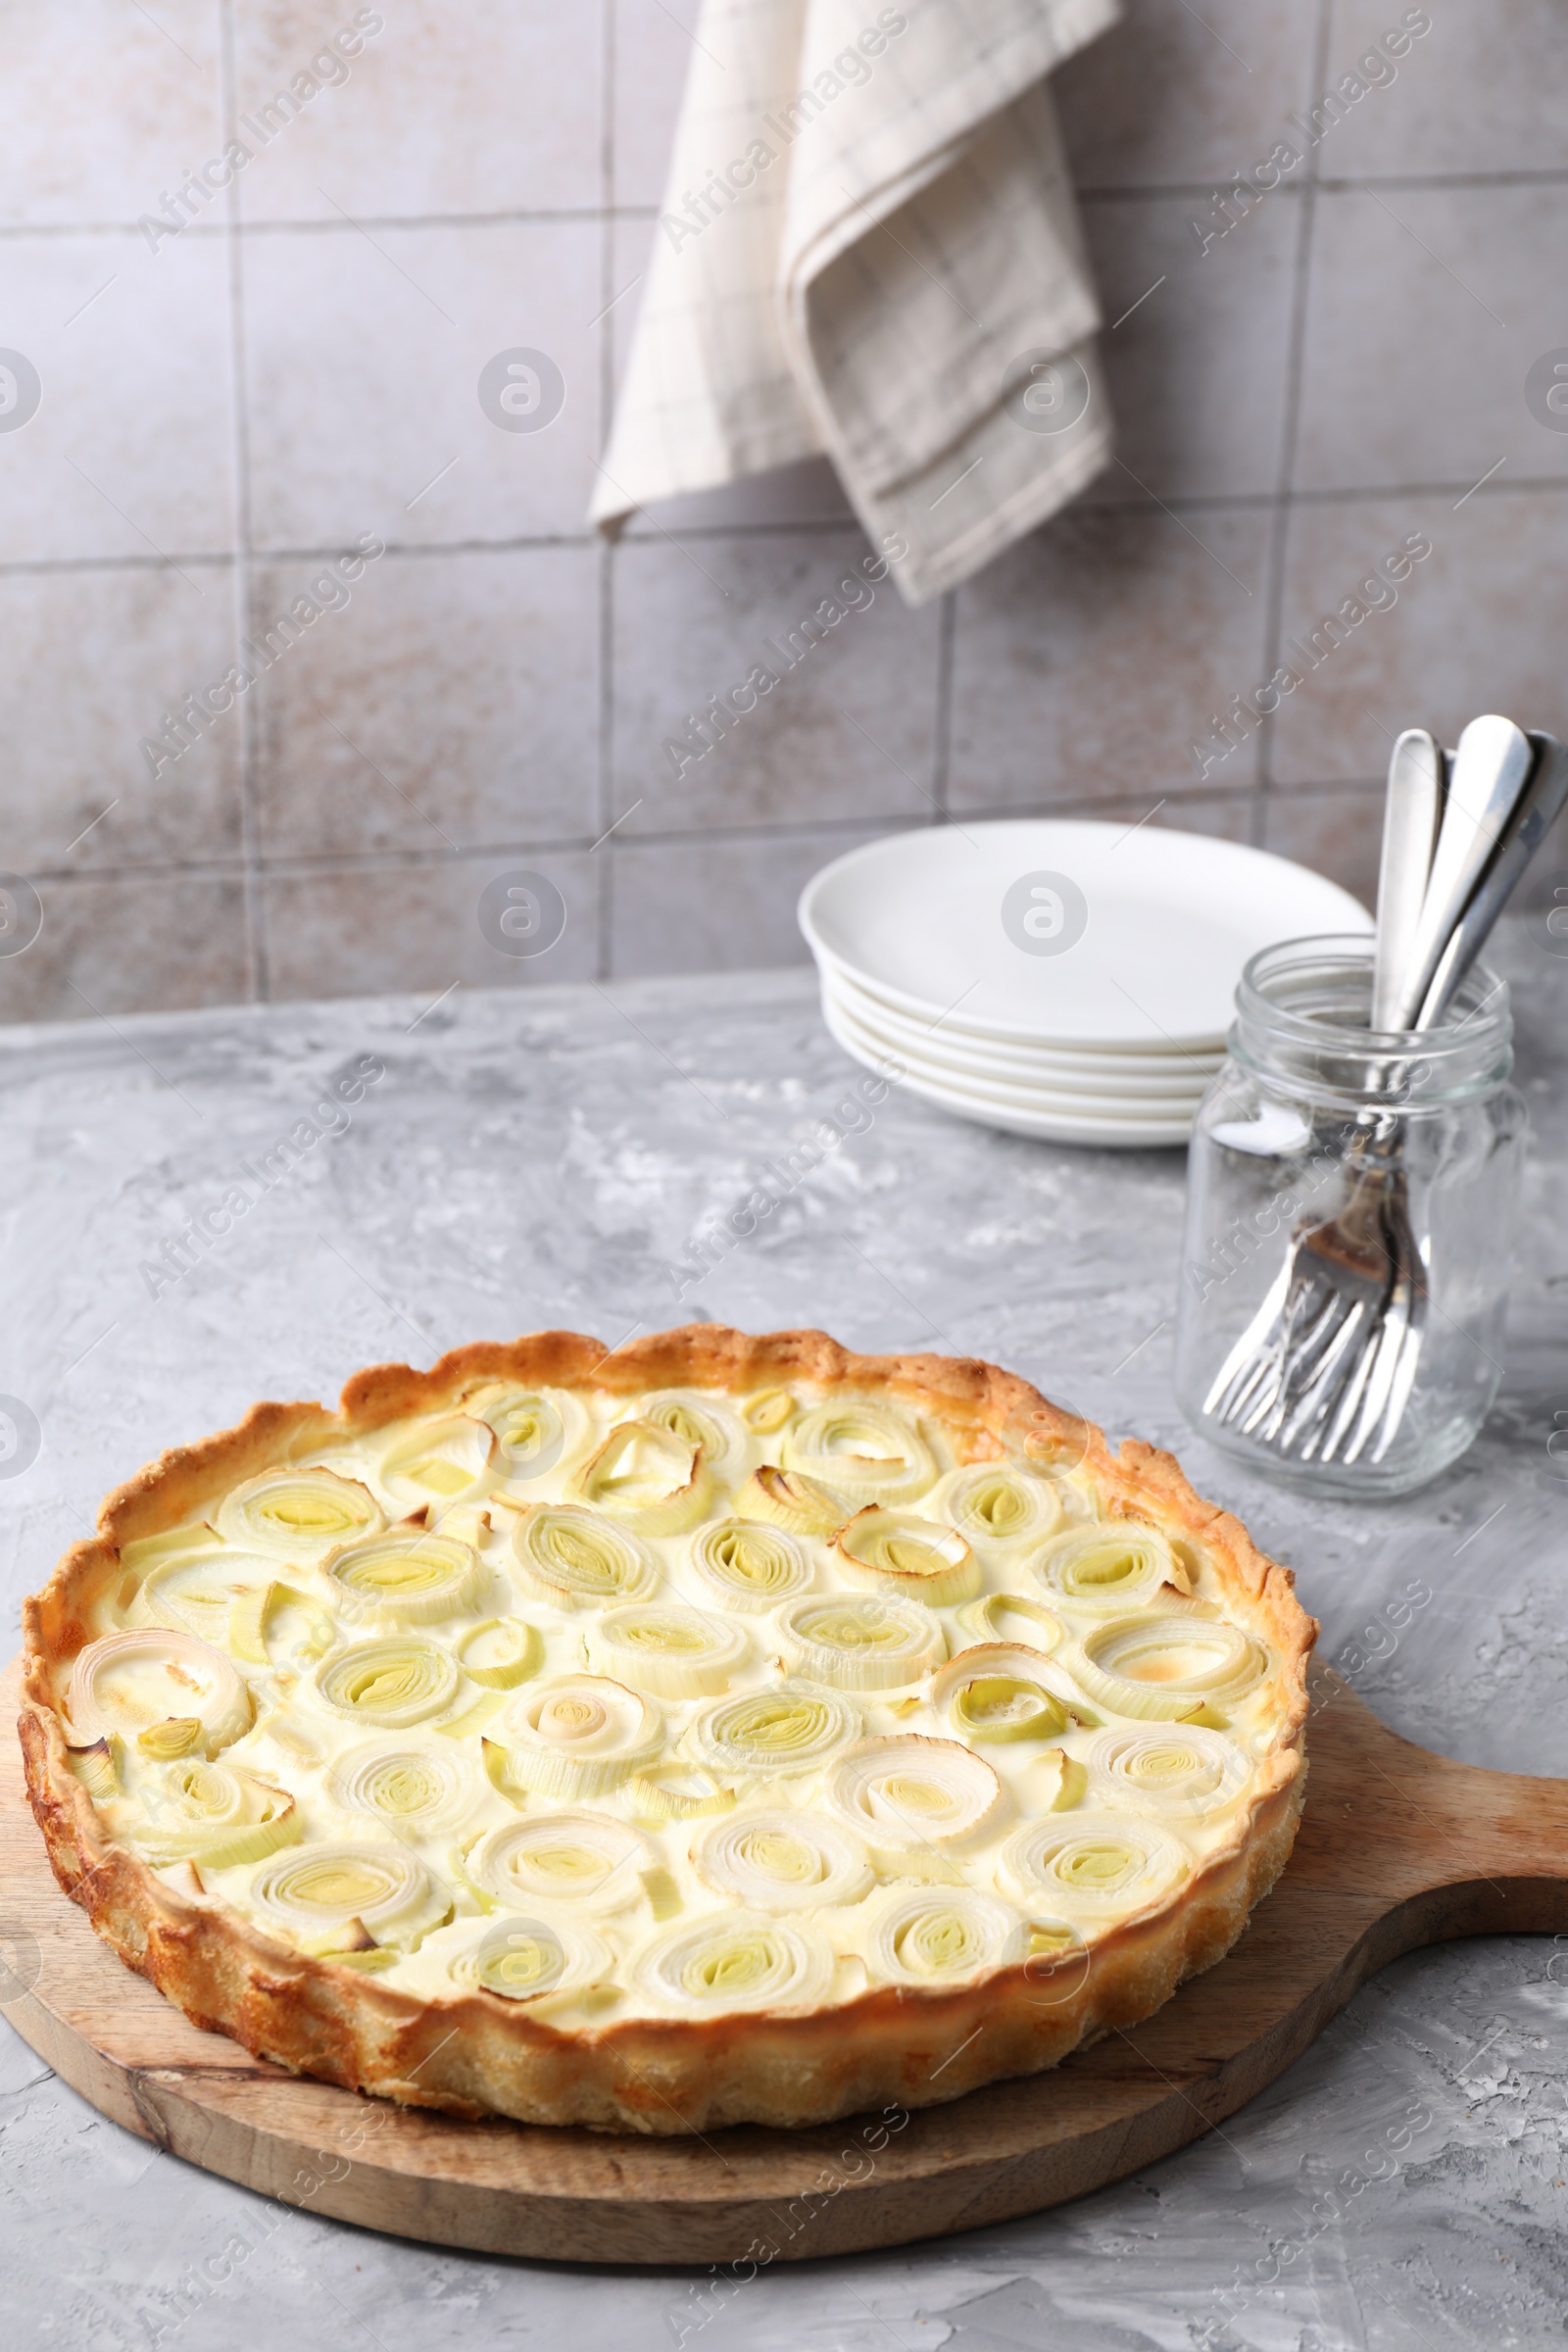 Photo of Freshly baked leek pie, forks and plates on grey textured table